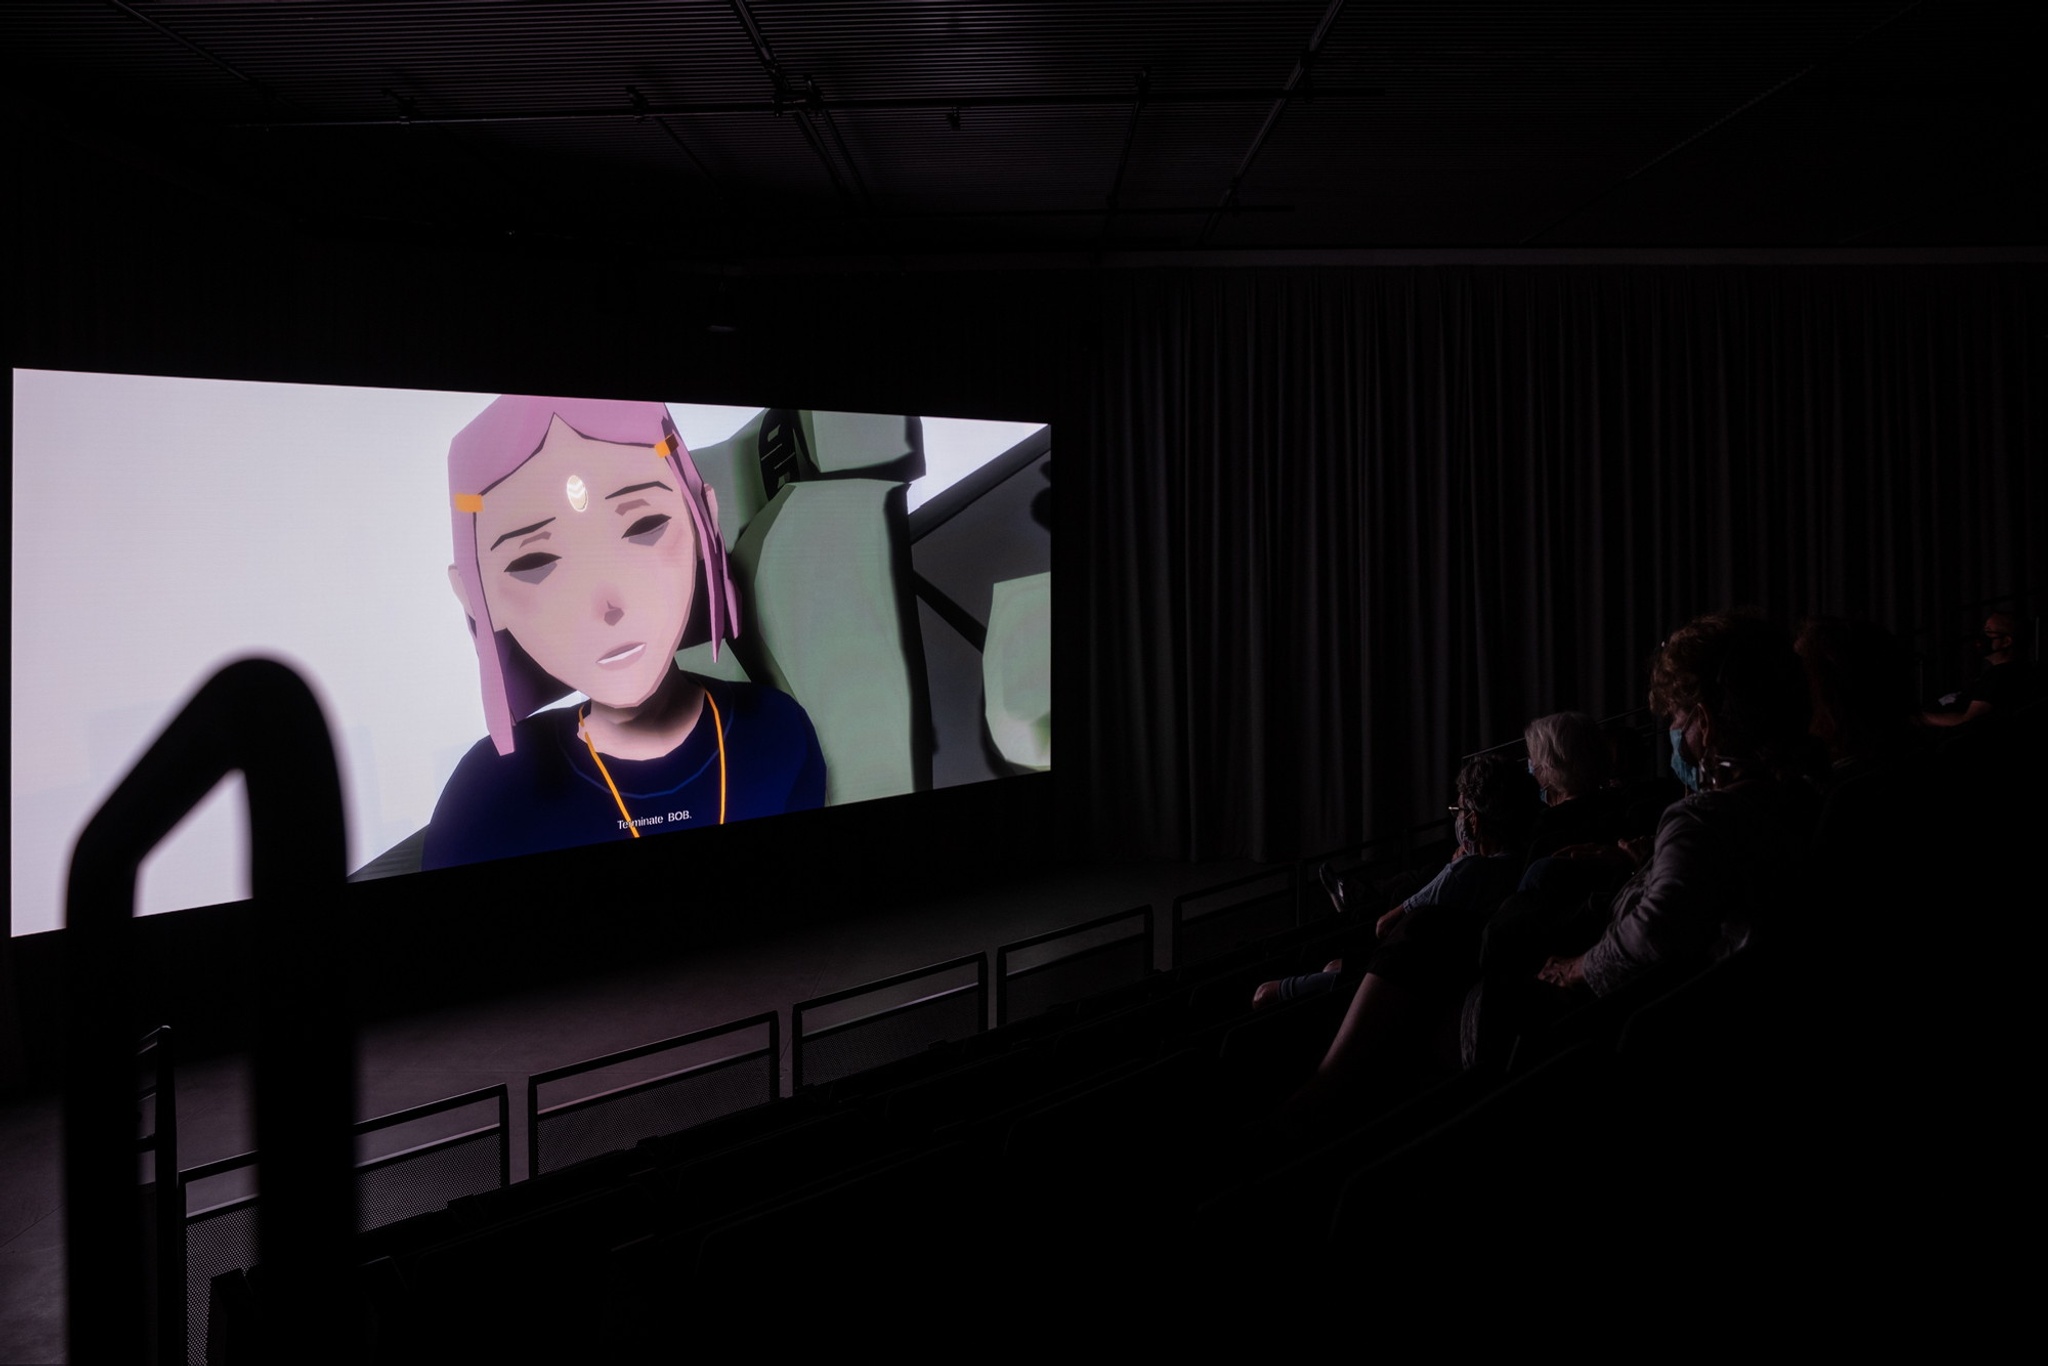 A movie screen seen over the edge of a bank of cinema seats. On the screen is a close up of an anime character's face. She has pink hair.